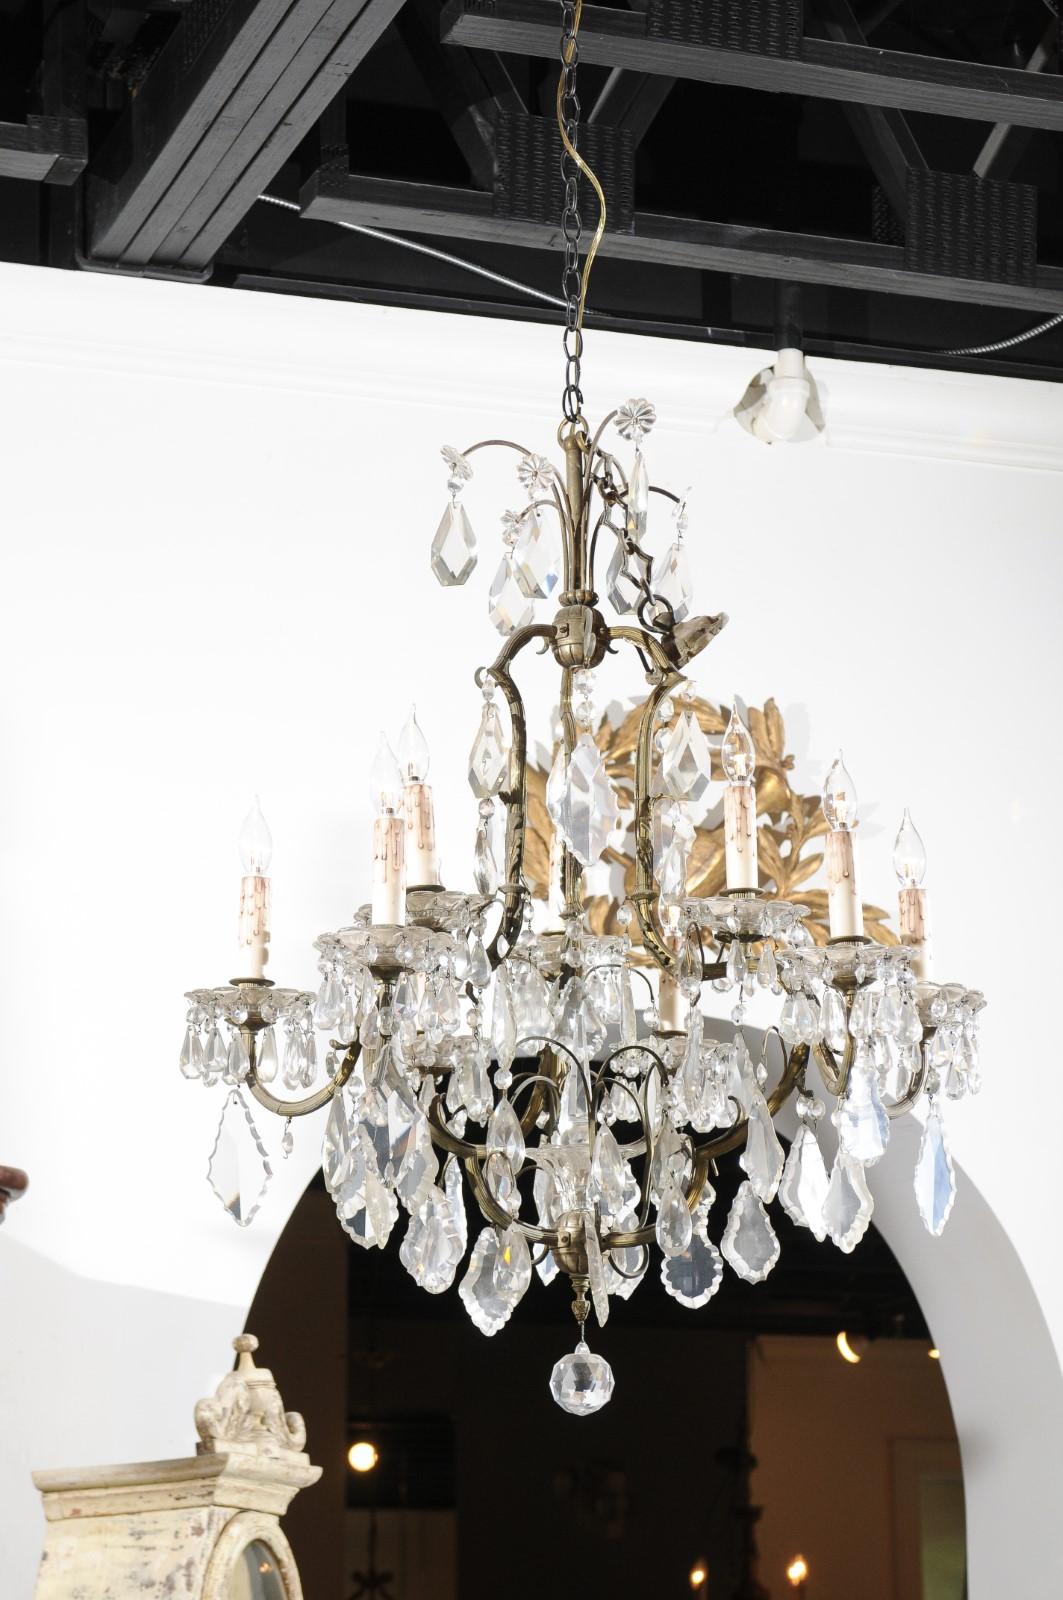 French Eight-Light Crystal Chandelier with Iron Armature from the 19th Century For Sale 3